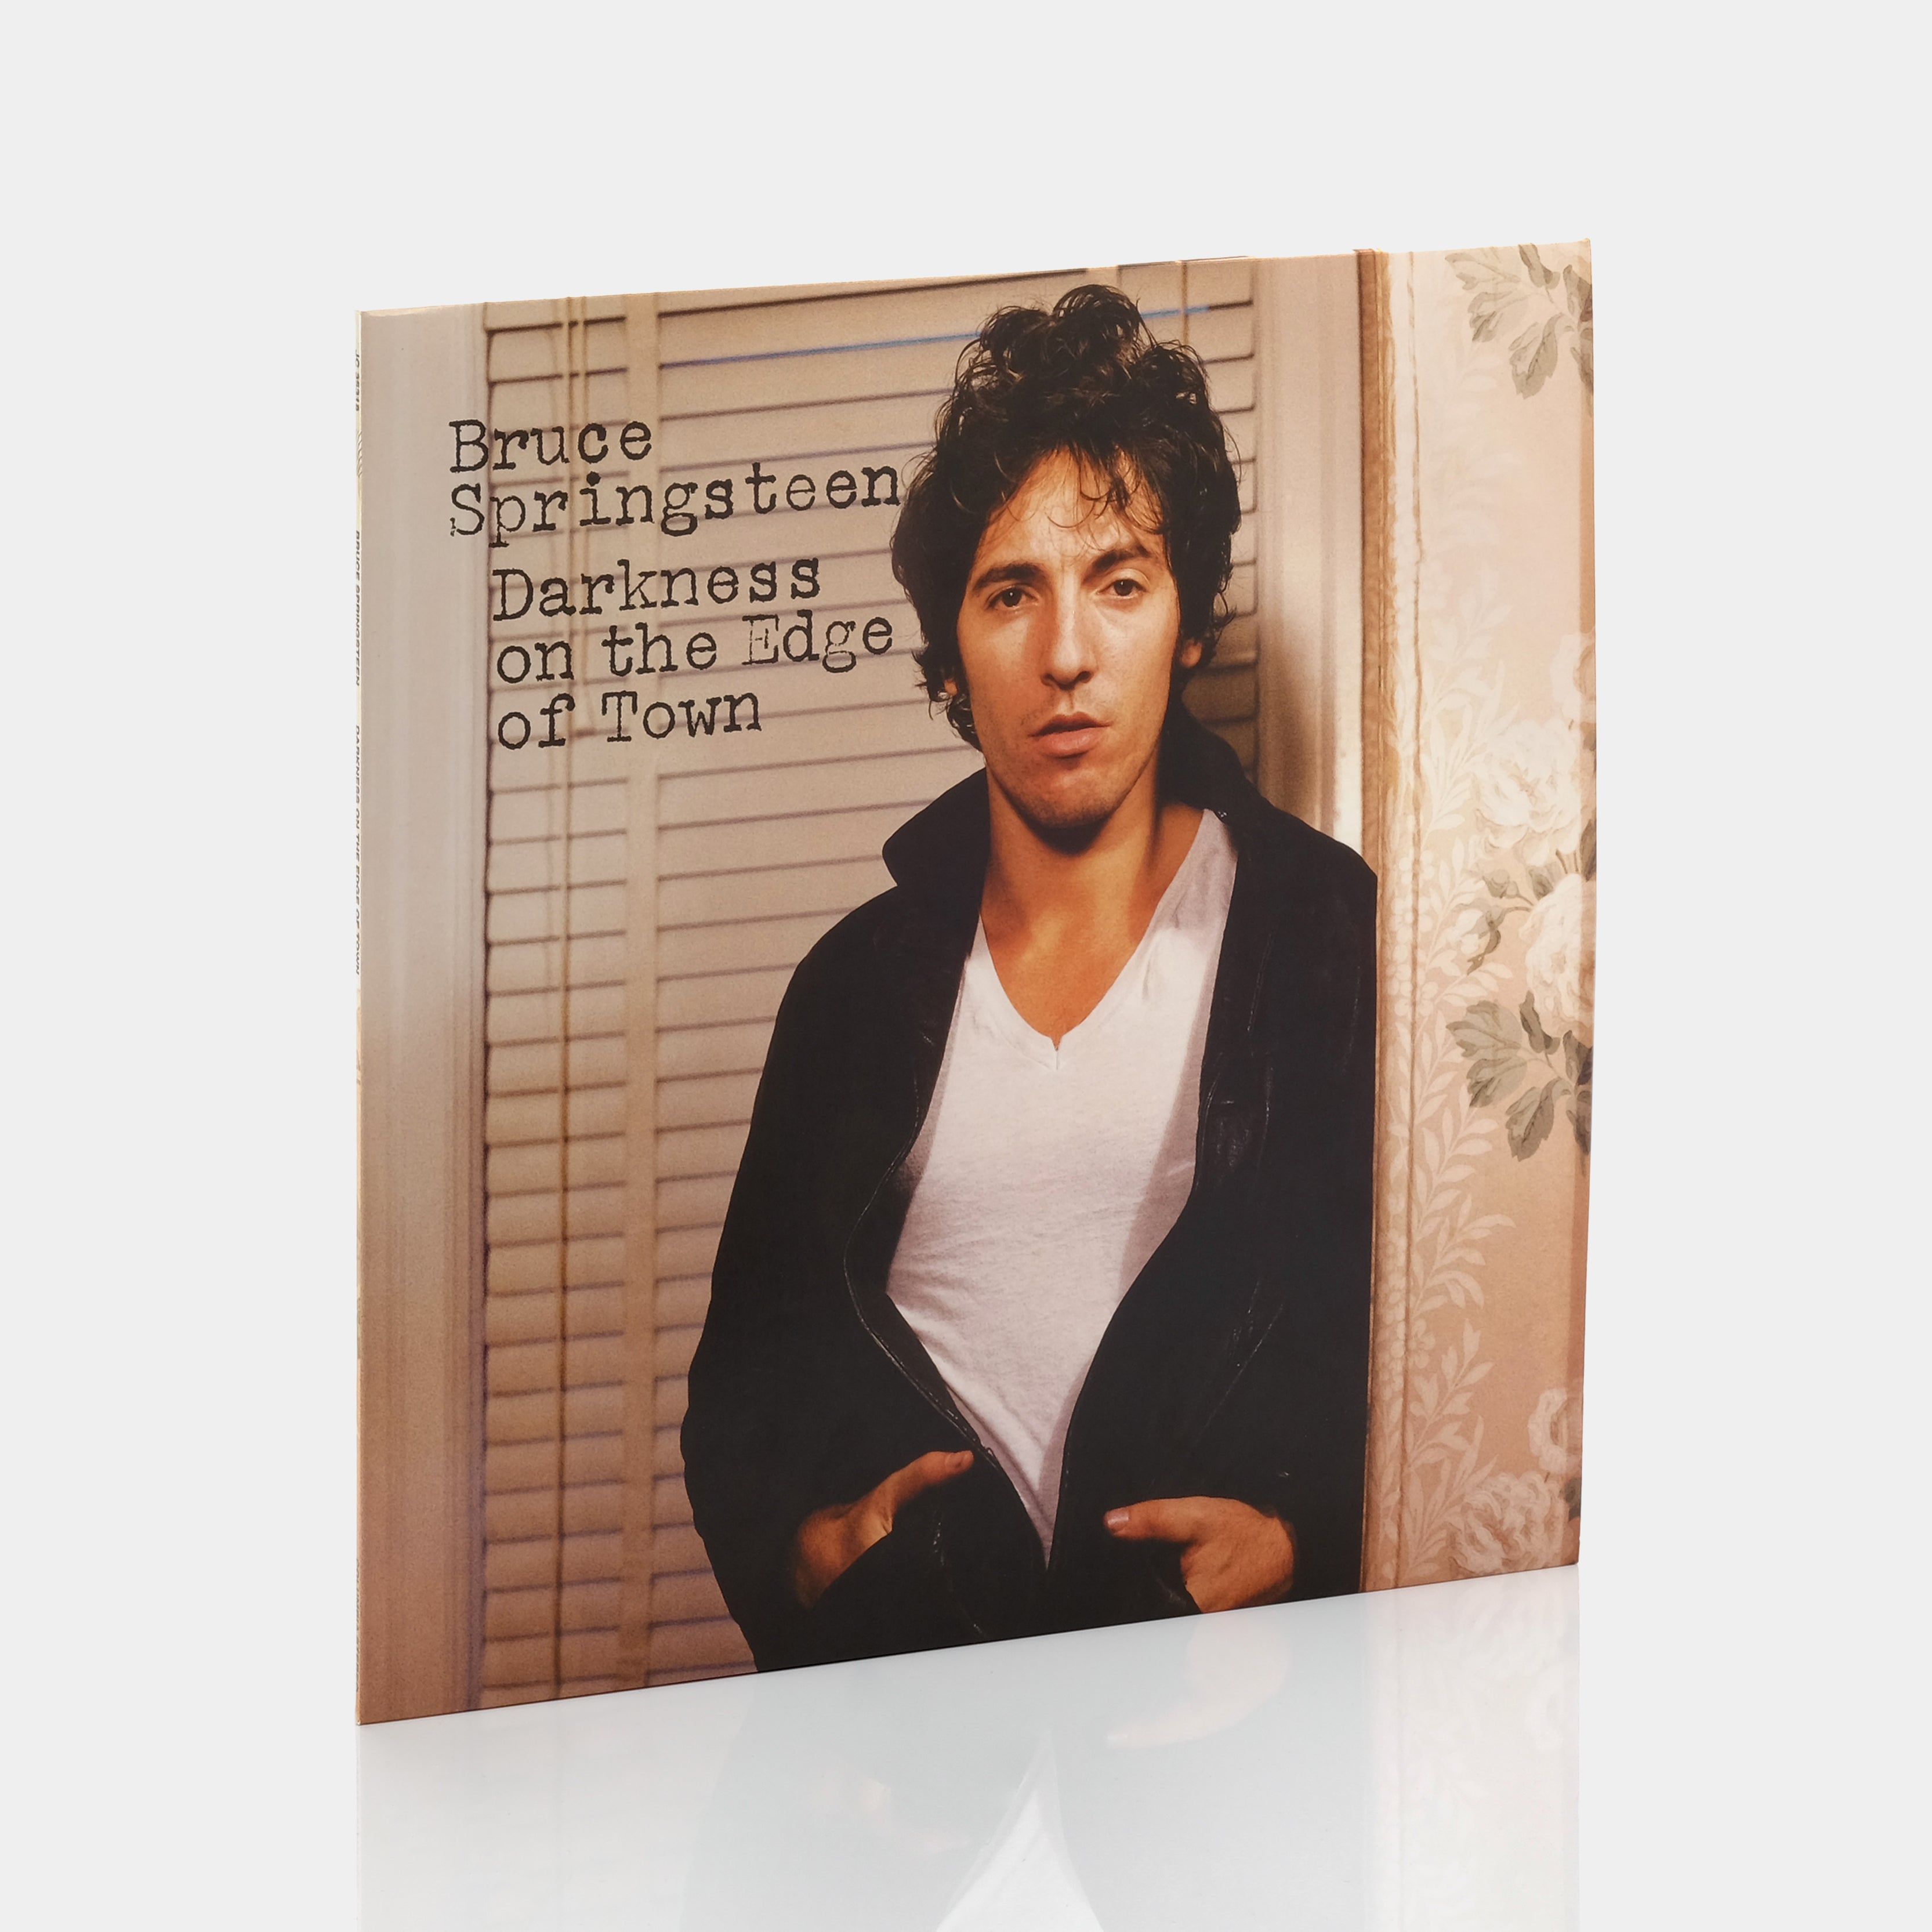 Bruce Springsteen - Darkness on the Edge of Town LP Vinyl Record